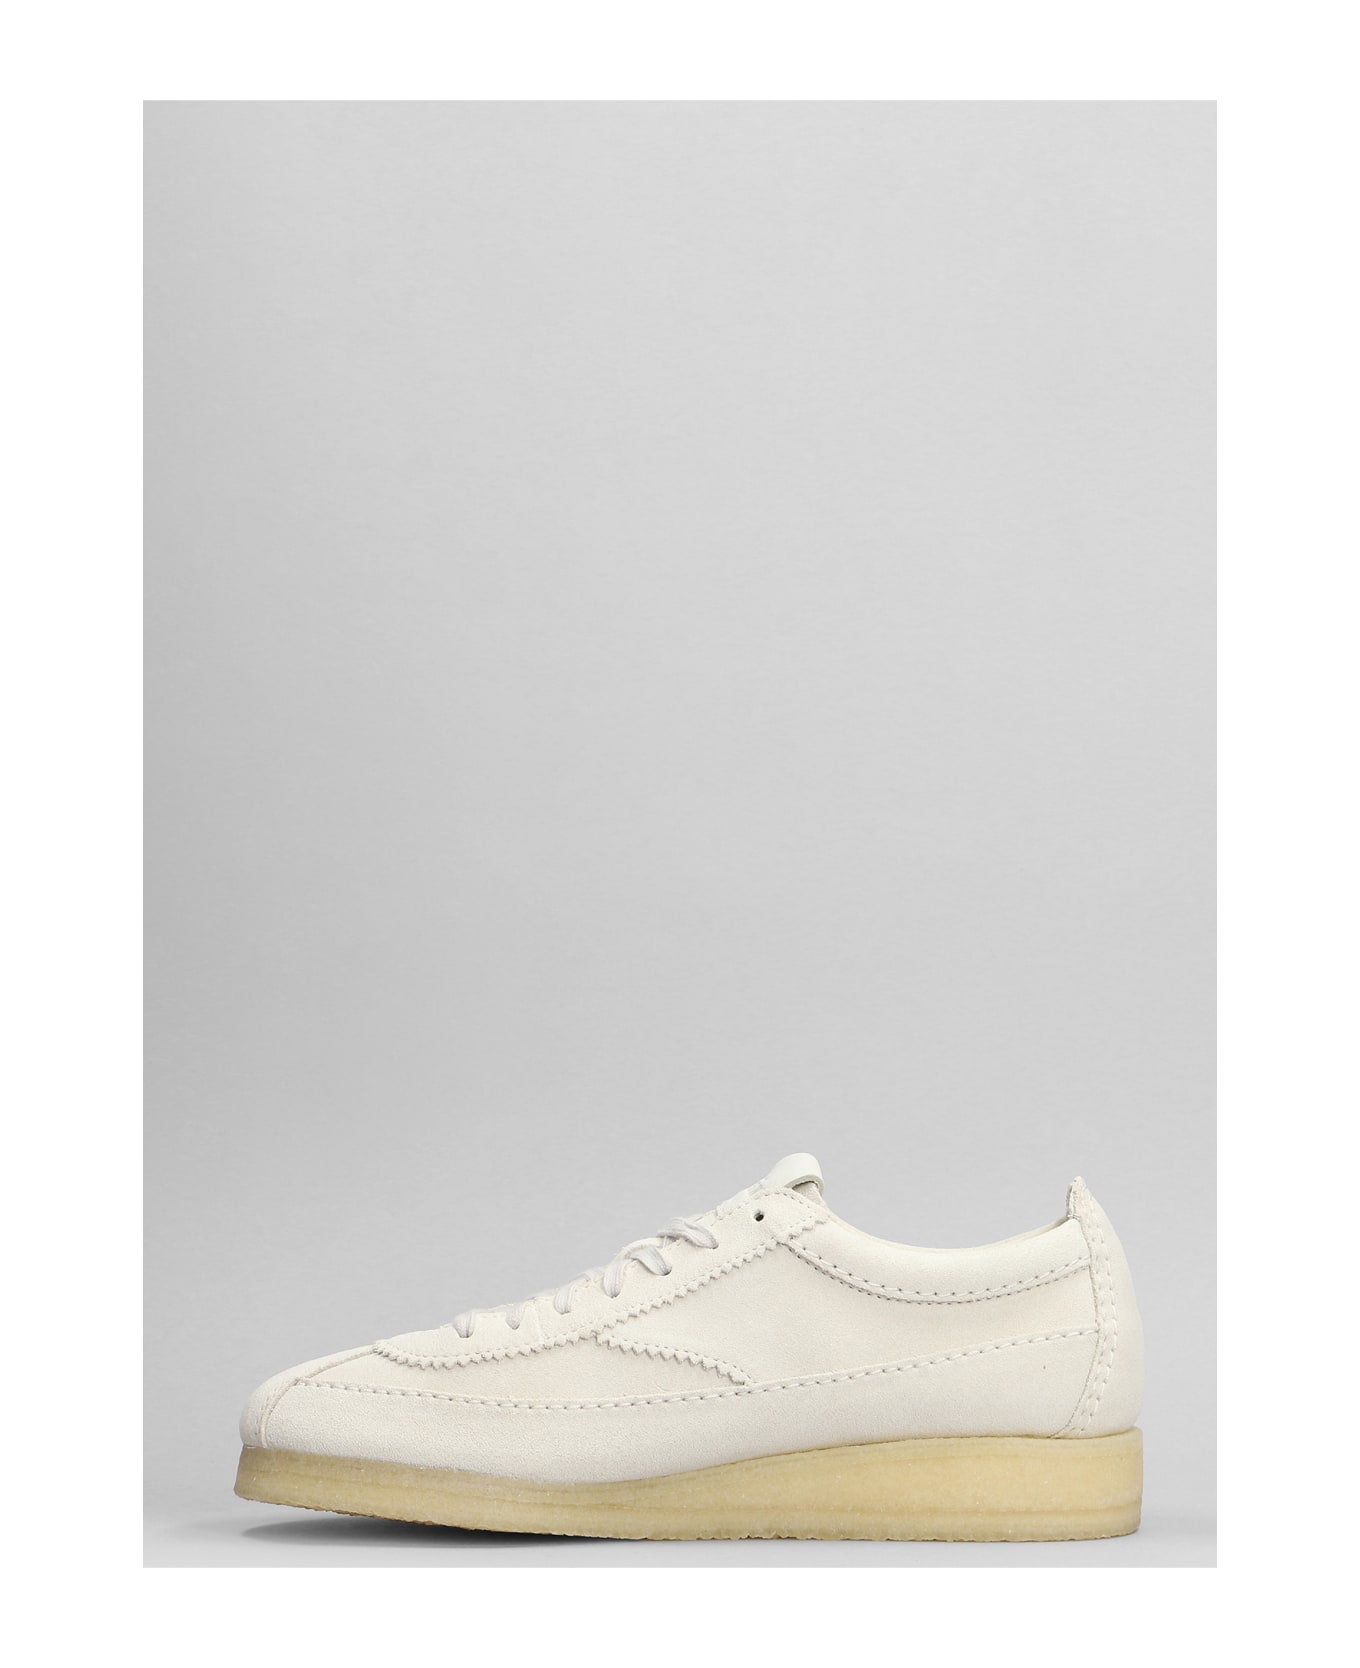 Clarks Wallabee Tor Lace Up Shoes In White Suede - white